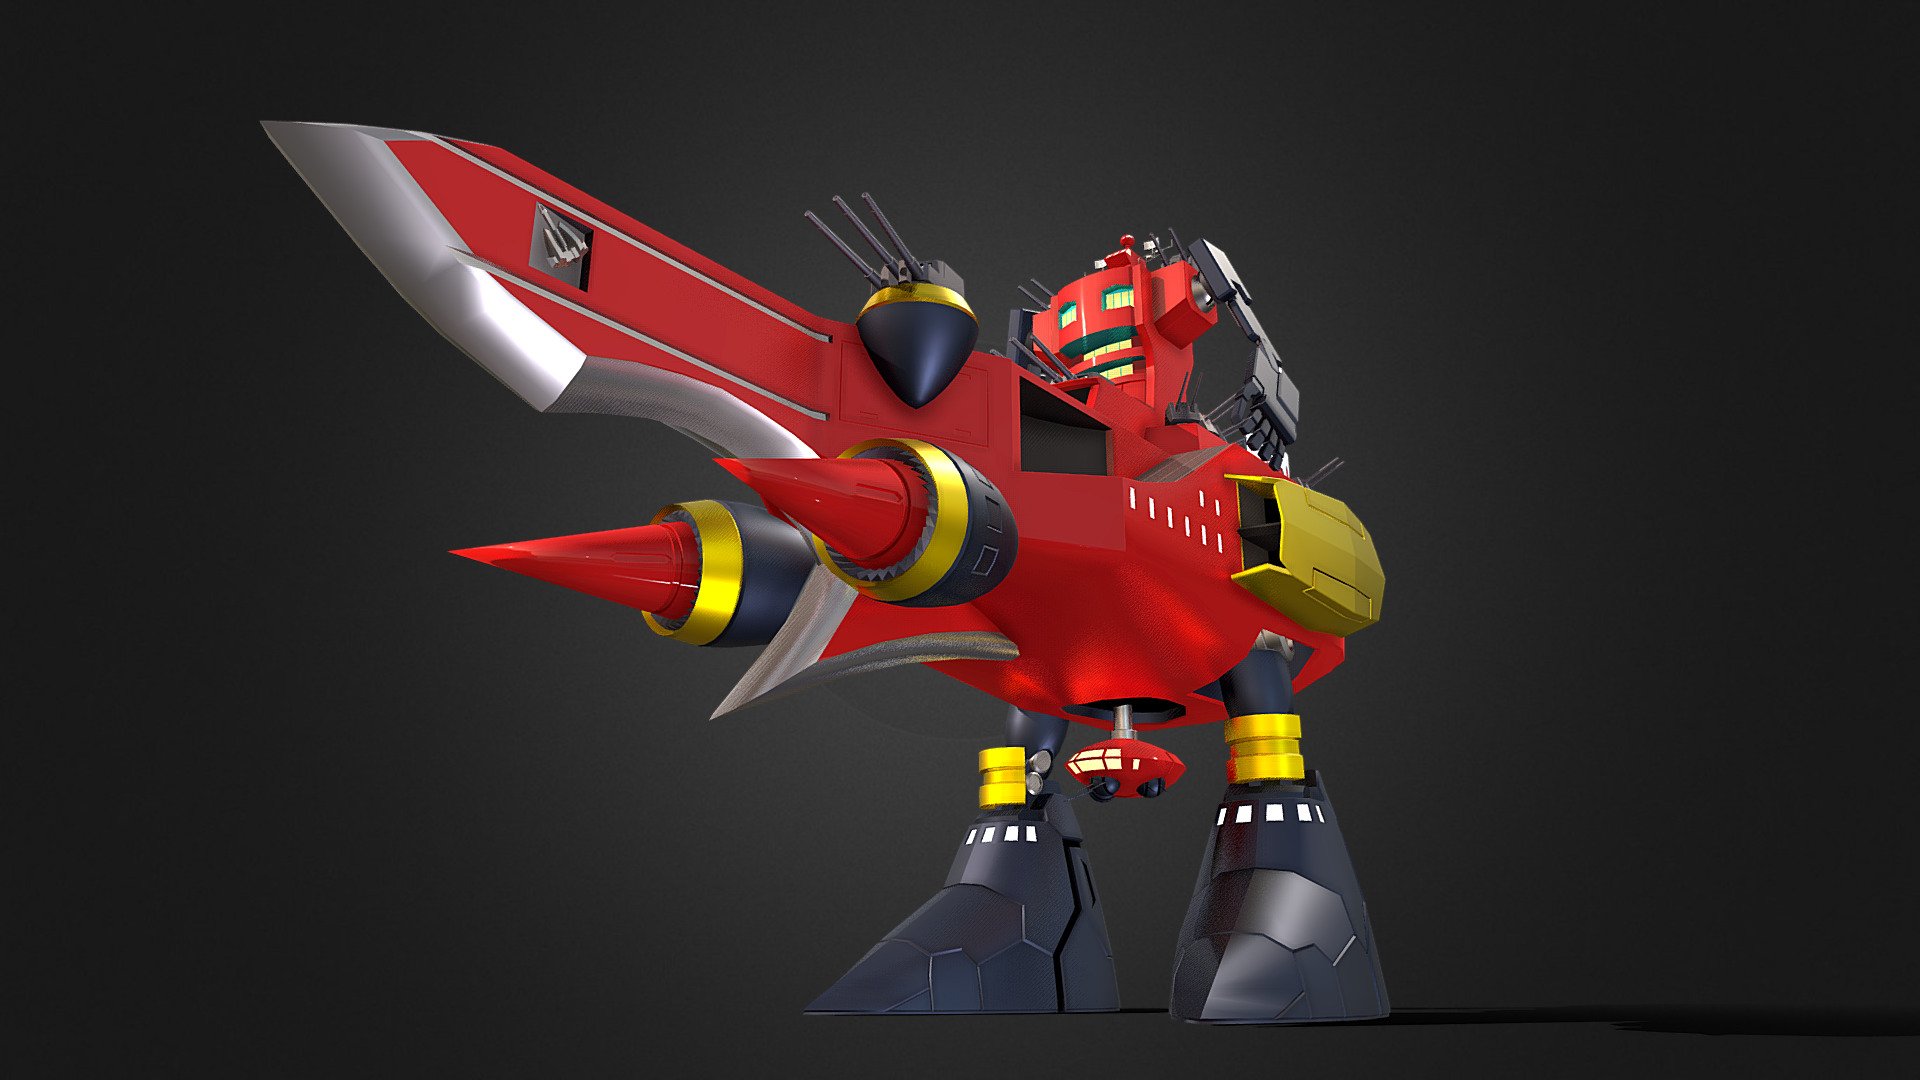 If you're interested in purchasing any of my models, contact me @ andrewdisaacs@yahoo.com

Dai-Gurren Brigade's mobile headquarters from the anime Tengen Toppa Gurren Lagann.

Made in 3DS Max by myself 3d model